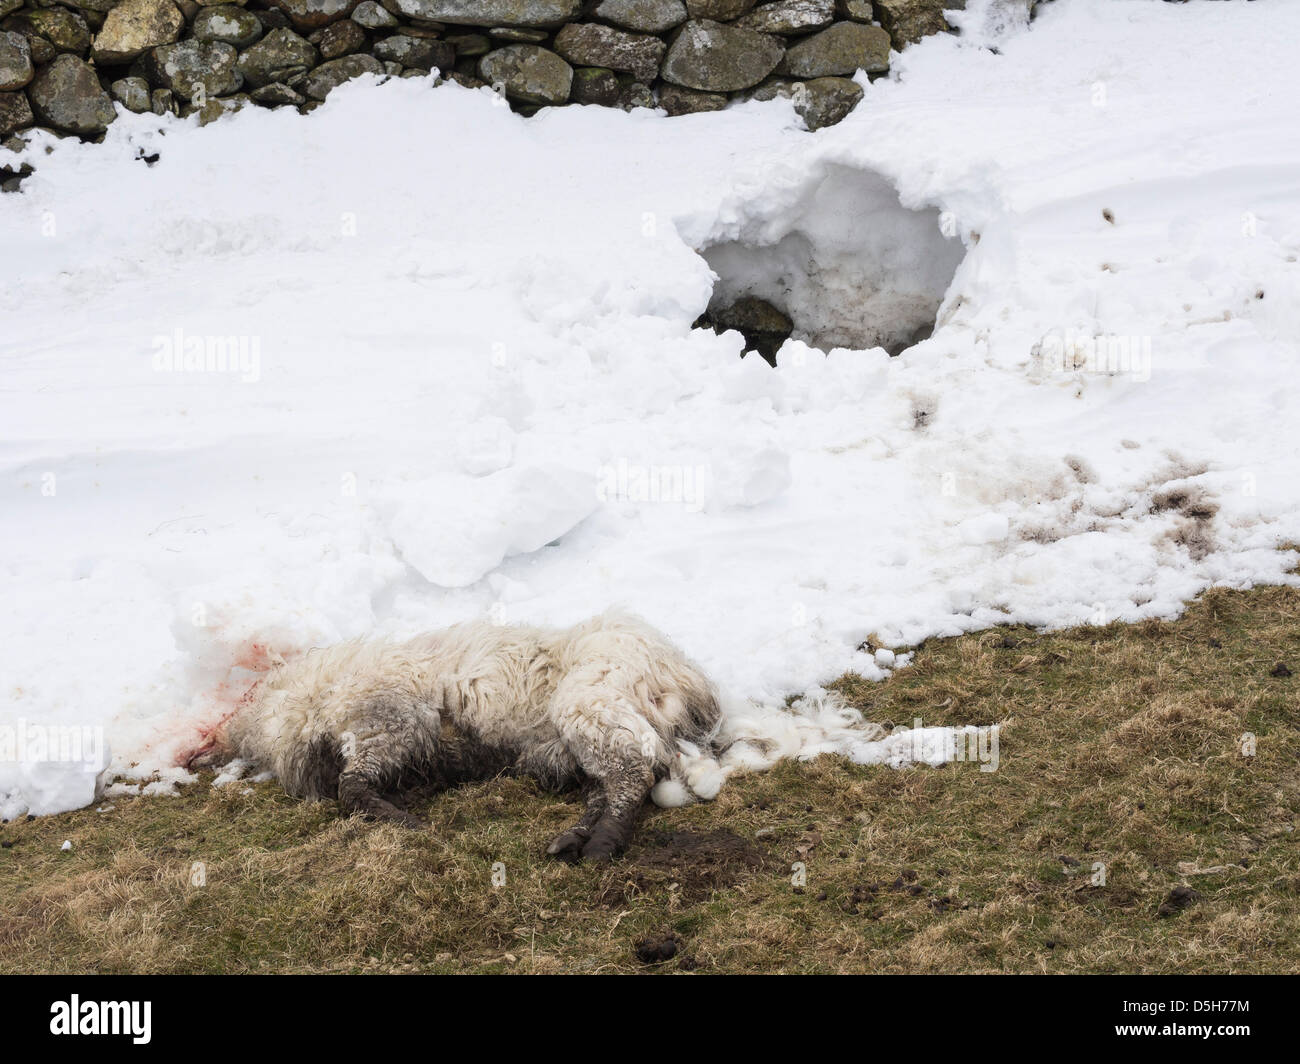 Conwy, North Wales, UK 2nd April 2013. Dead sheep lie by a snow hole after being buried in a snow drift where they sheltered in the hills of Snowdonia when heavy snowfall hit the region.  During the coldest March in the UK since 1962 heavy snow fell in the mountains of North Wales and many hillfarmers lost sheep in the sudden severe weather. Farmers on remote farms now face the problem of disposing of the bodies. Stock Photo